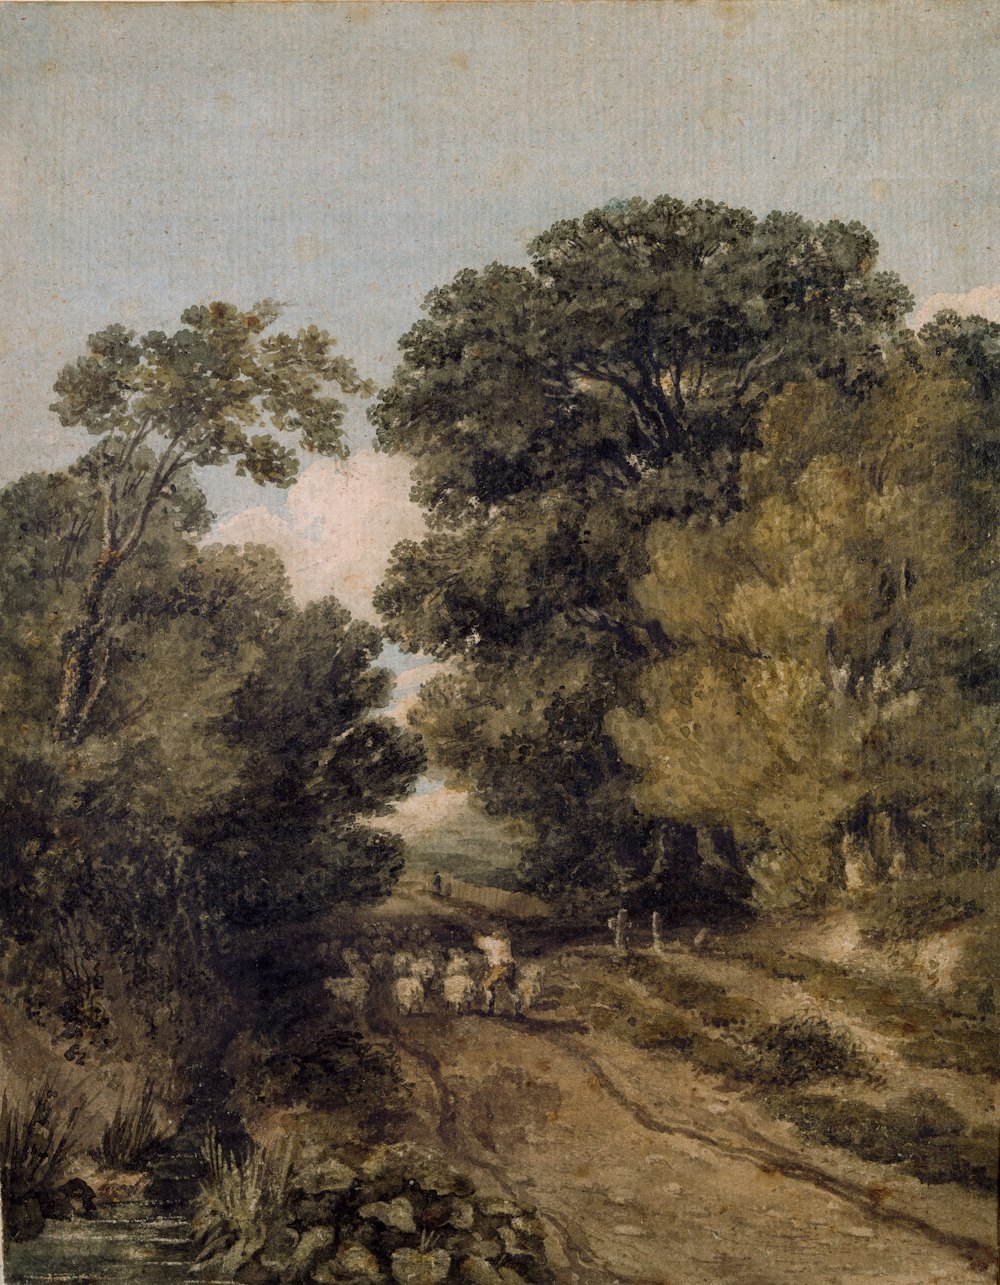 a painting of a dirt road with a horse and carriage on it